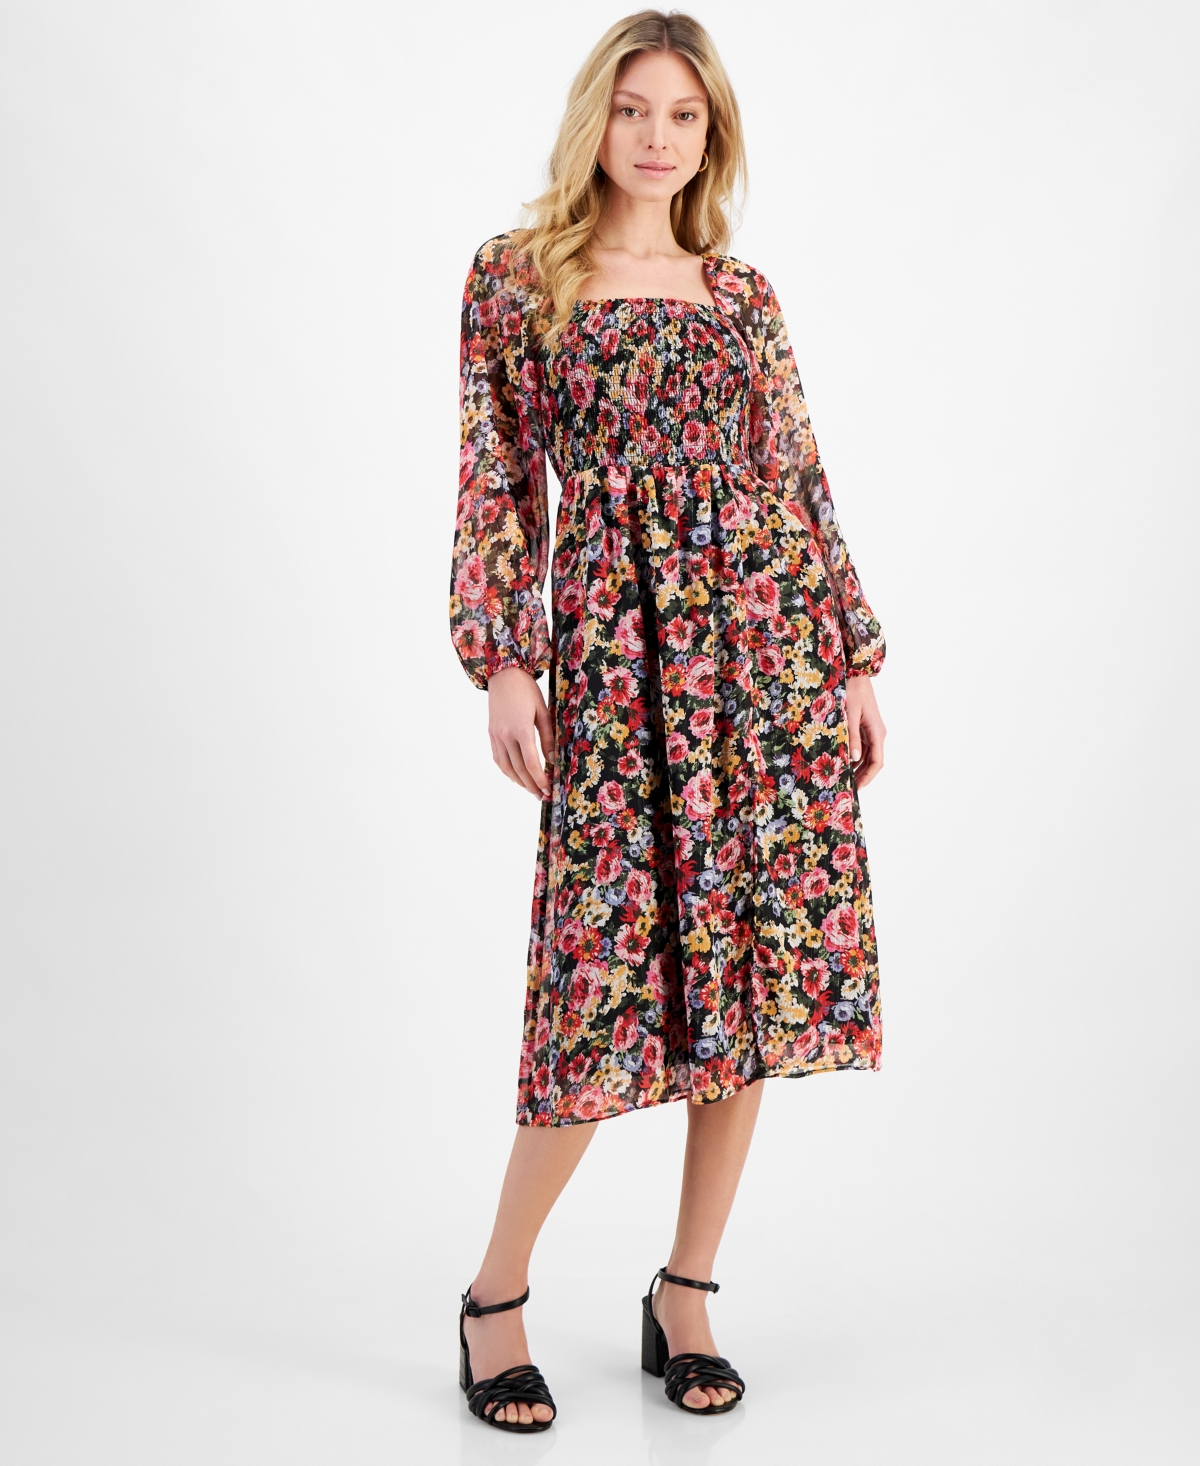 Women's Floral-Print Smocked Midi Dress - Dark Grounded Bright Floral